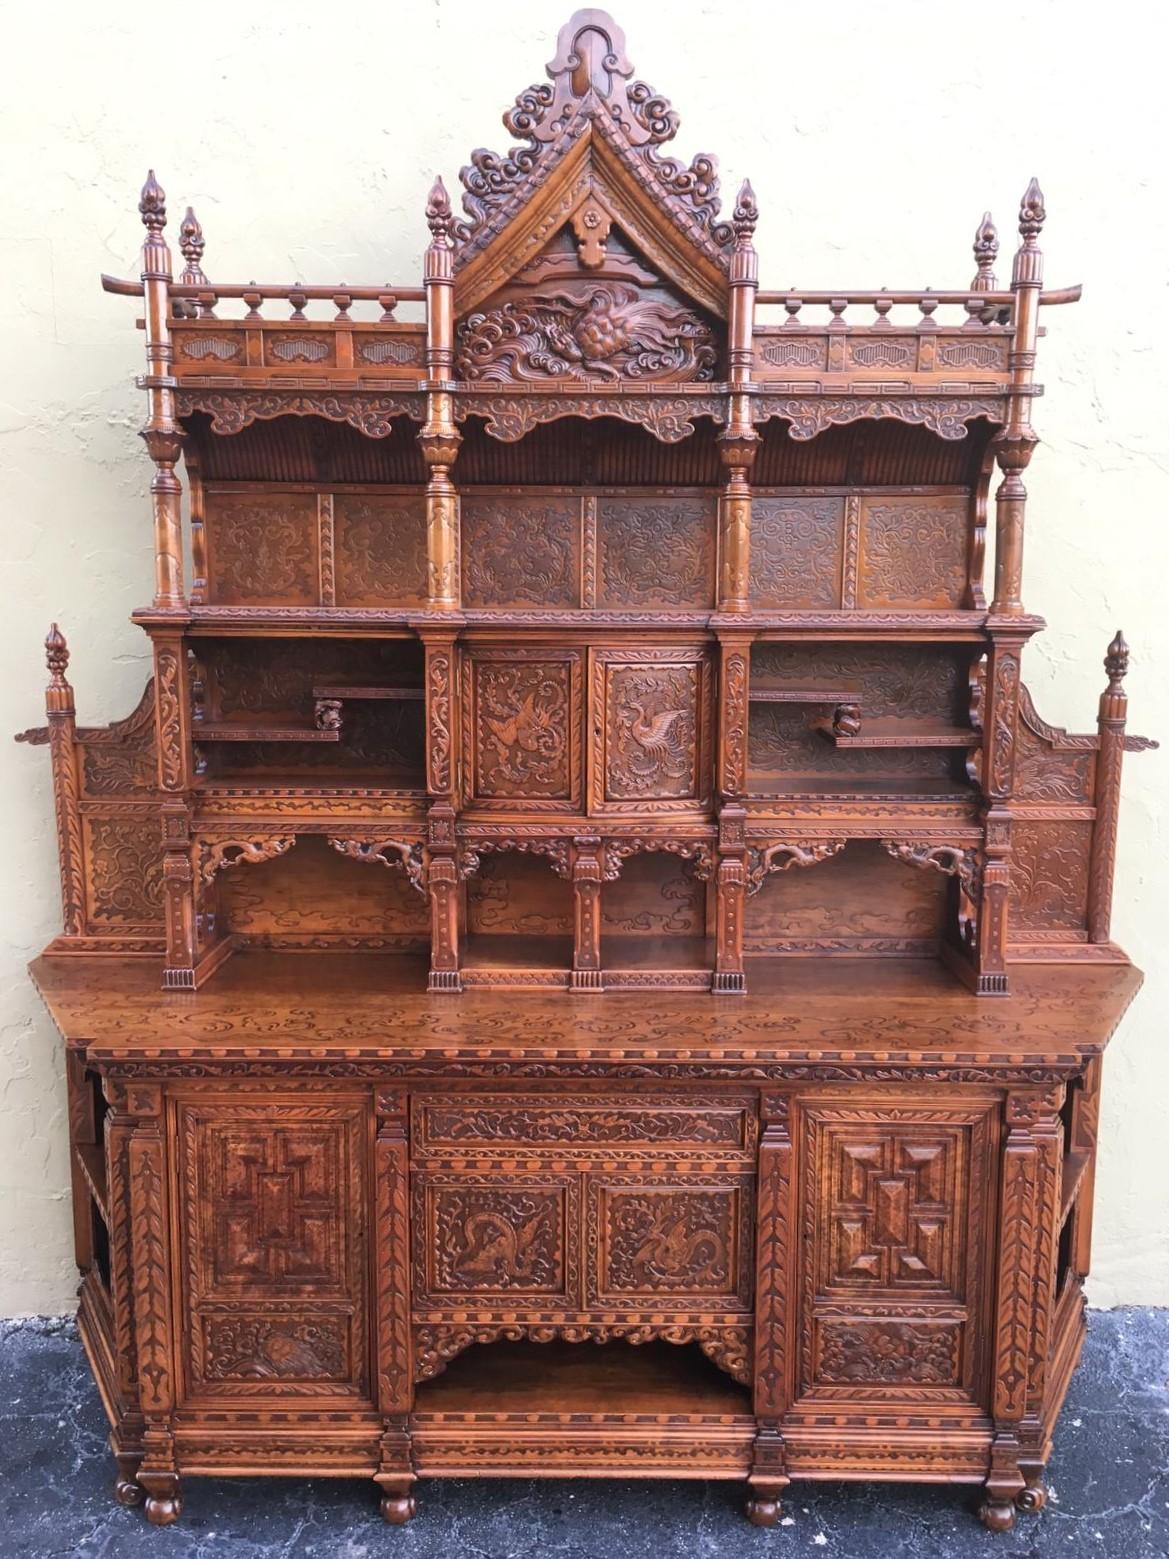 Monumental antique hand-carved elmwood cabinet. Sideboard, 20th century.